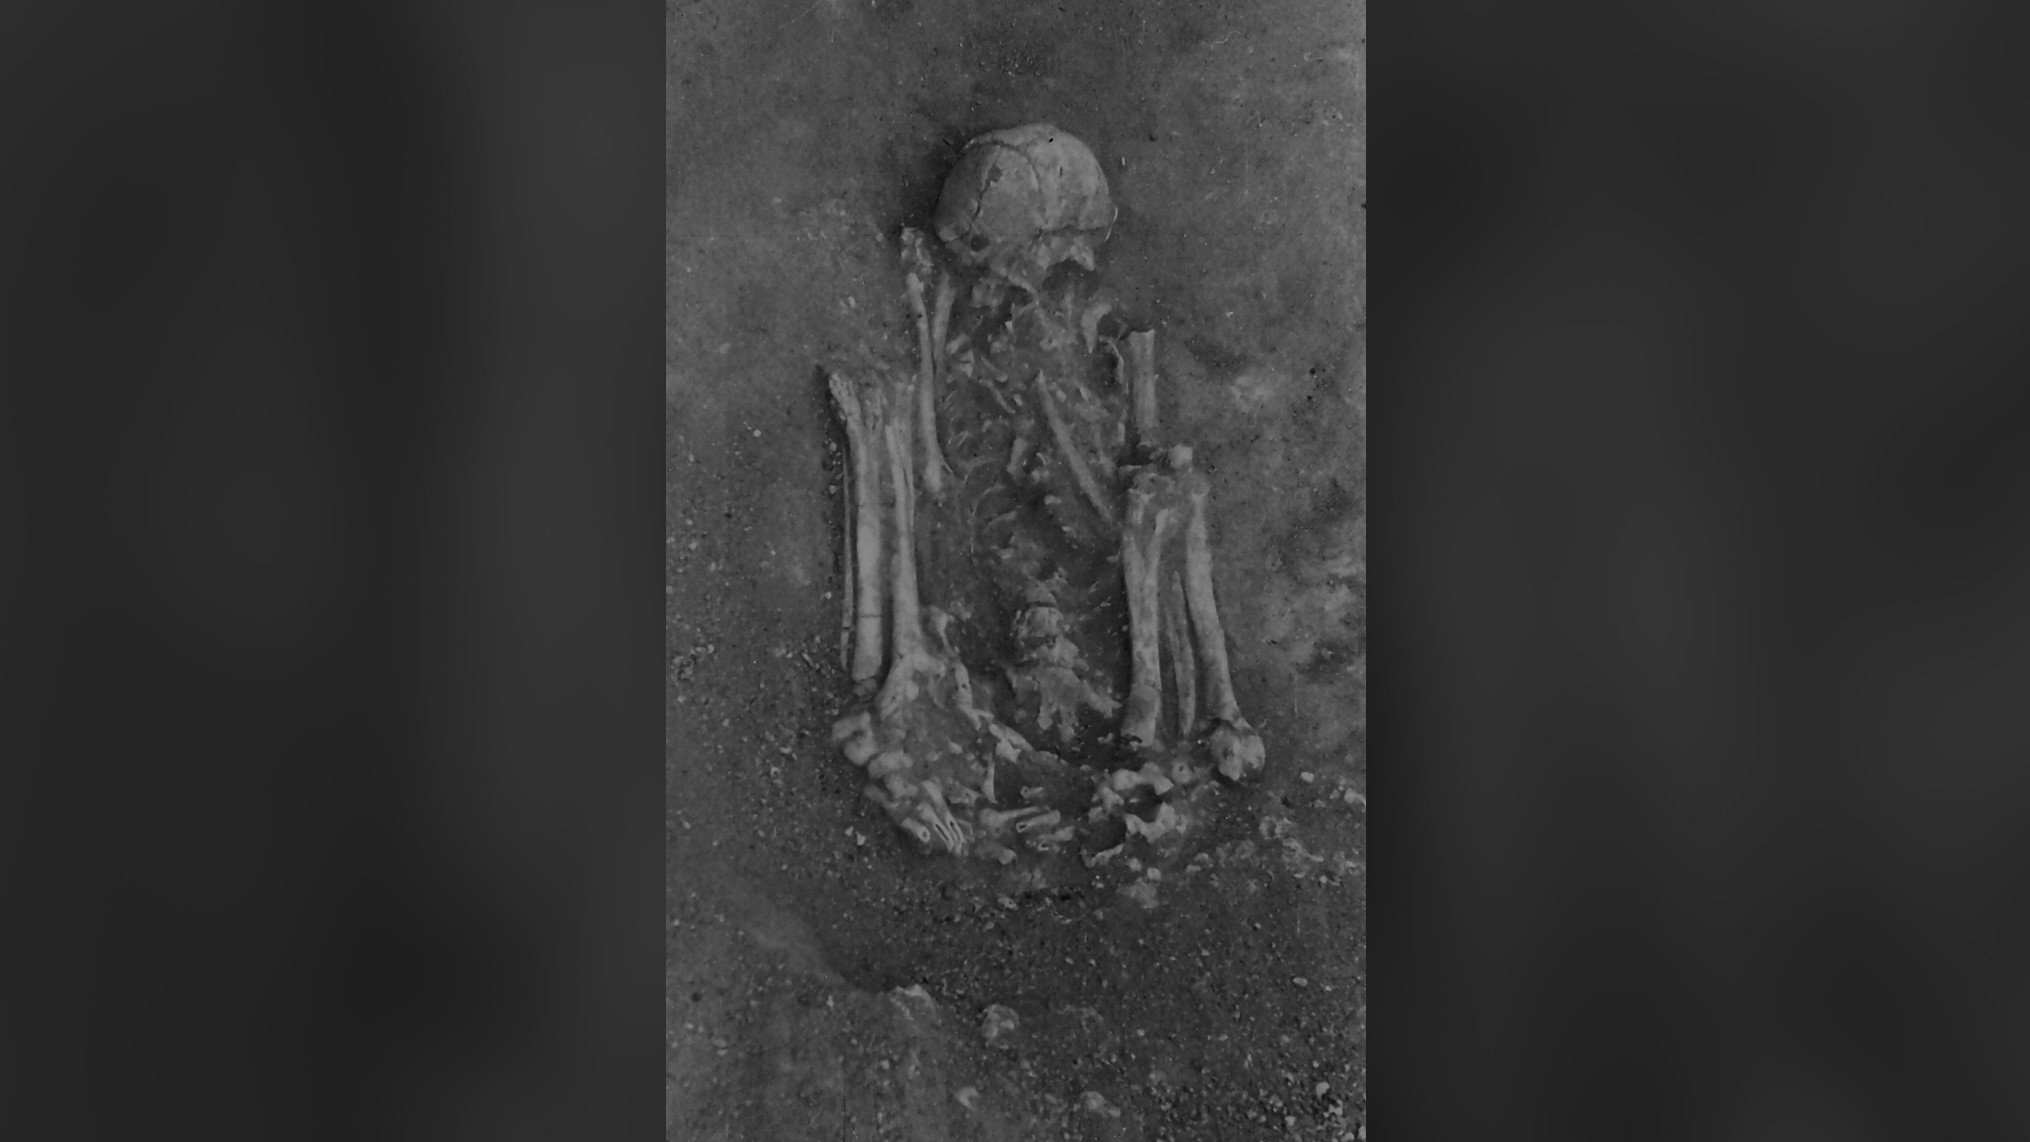 Photographs of one of the skeletons excavated from an archaeological site in the Sado Valley showed signs it had been mummified before it was buried about 8000 years ago.